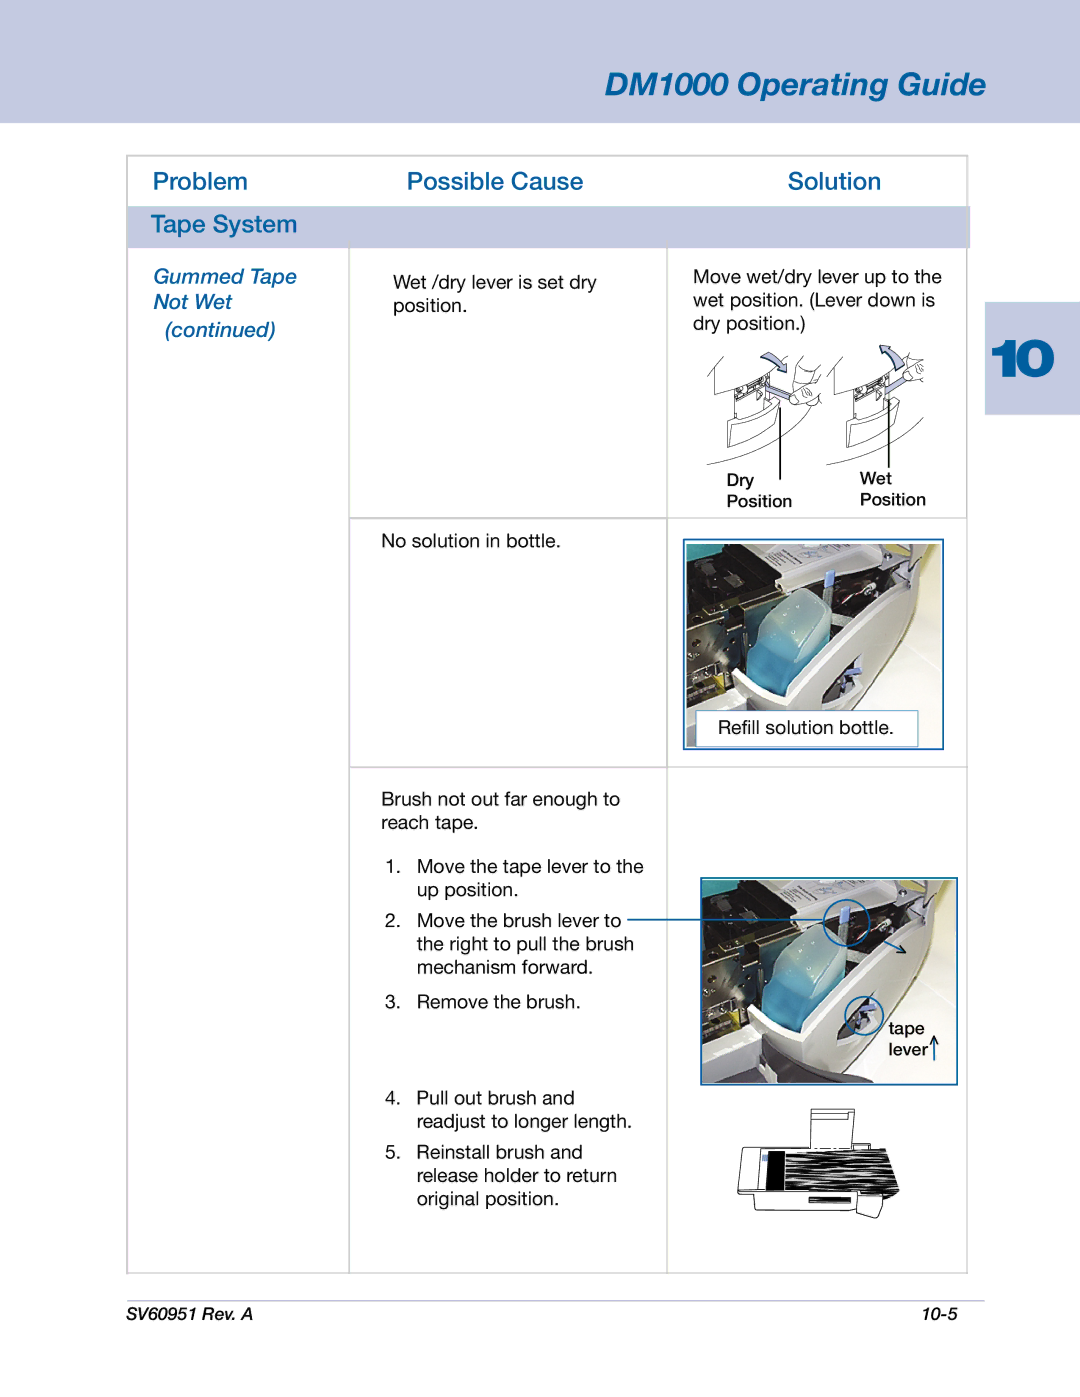 Pitney Bowes DM1000 manual Problem Tape System, Possible Cause Solution, Gummed Tape Not Wet 